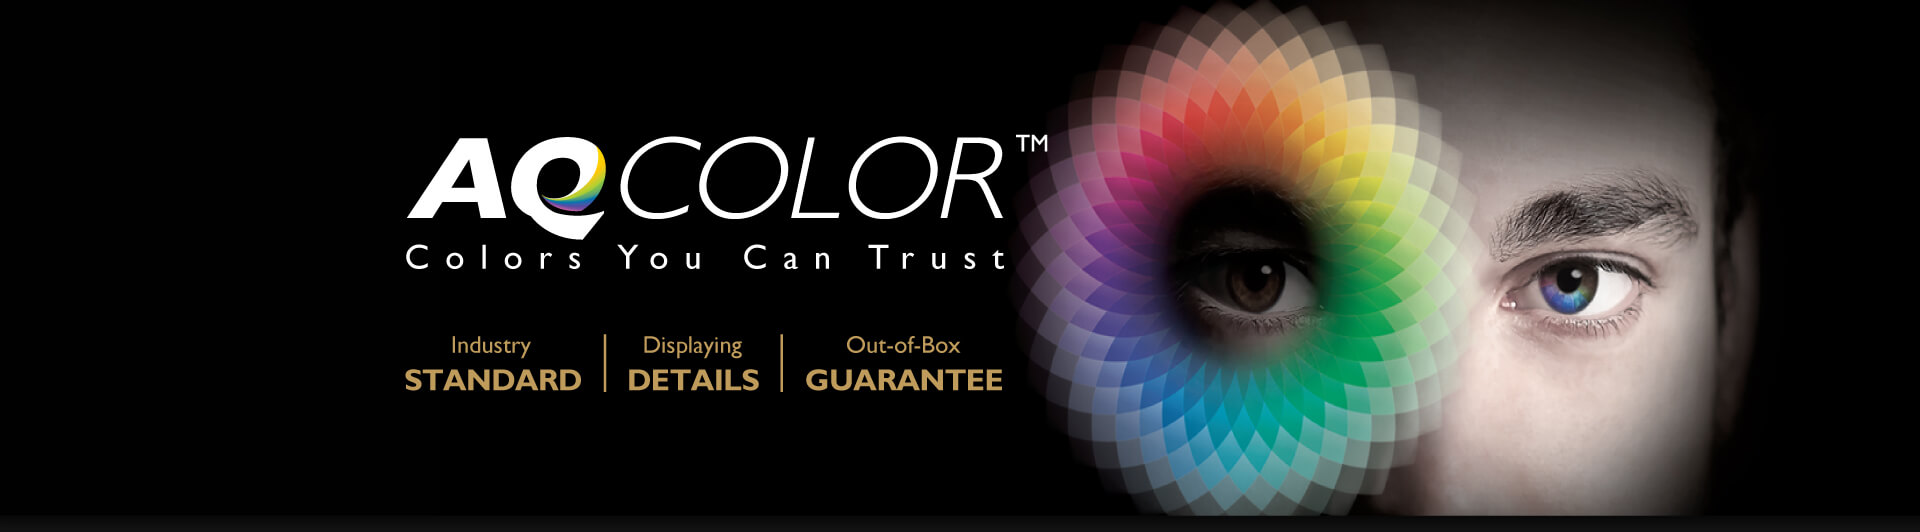 AQCOLOR banner showing a man looking forward, with a graphic color wheel in front of his right eye. There is also text that reads: Colors You Can Trust - Industry Standard, Displaying Details and Out-of-the-Box Guarantee